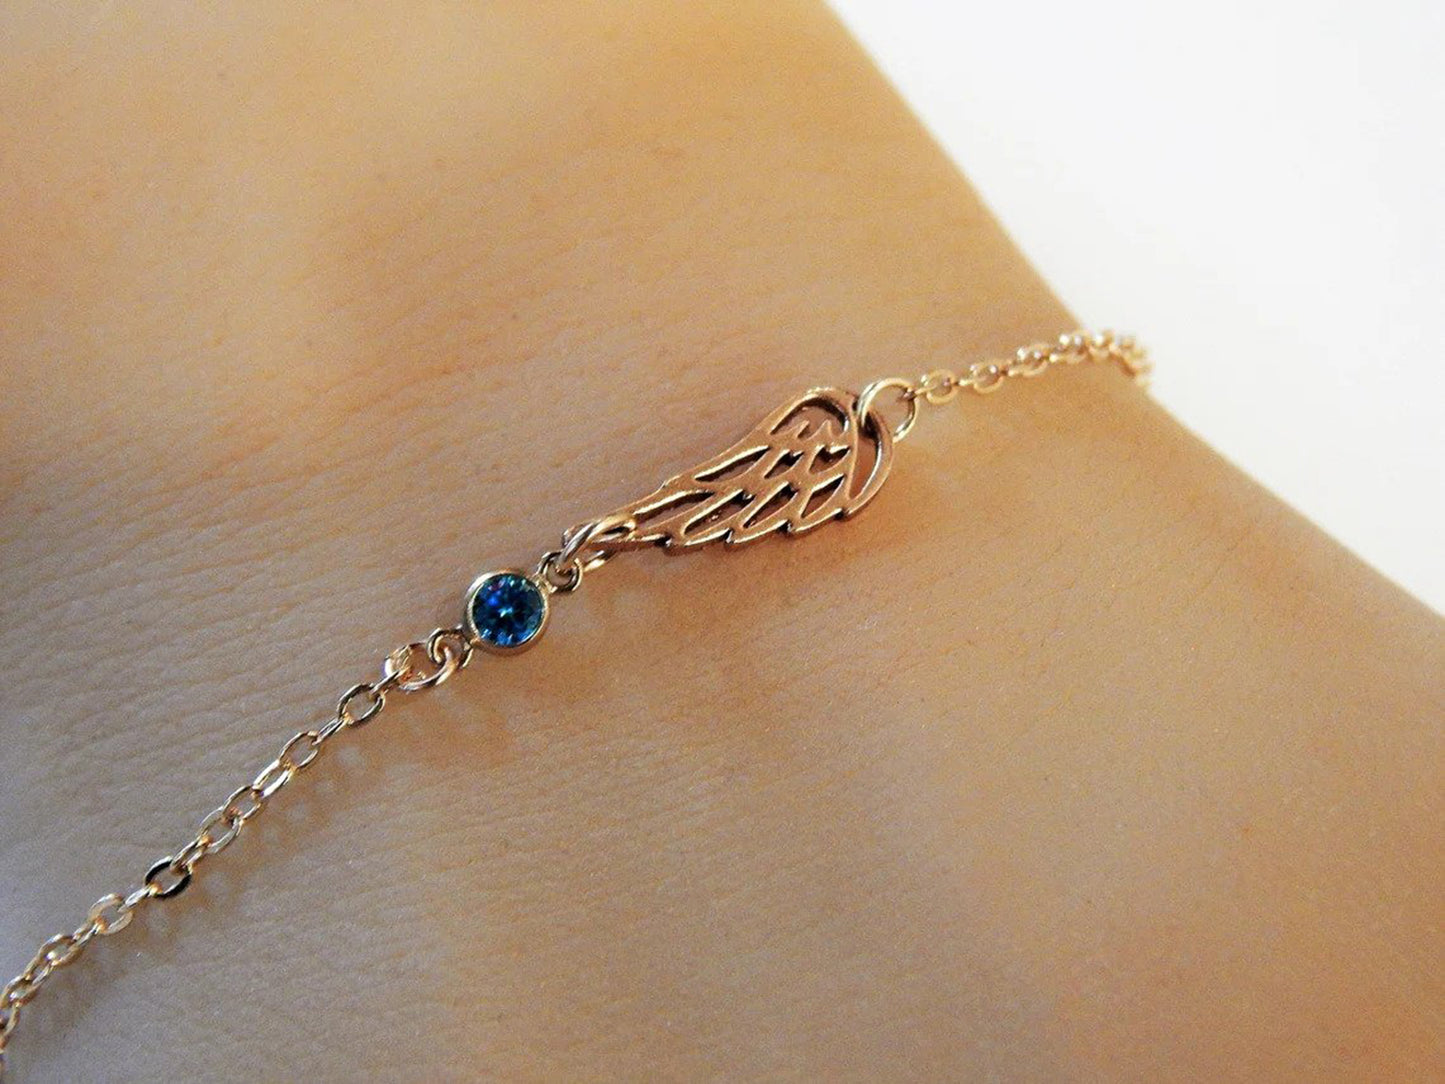 Guardian angel wing charm bracelet with personalized september birthstone option in gold filled chain is worn on a model for Gilded Sapphire's custom jewelry.